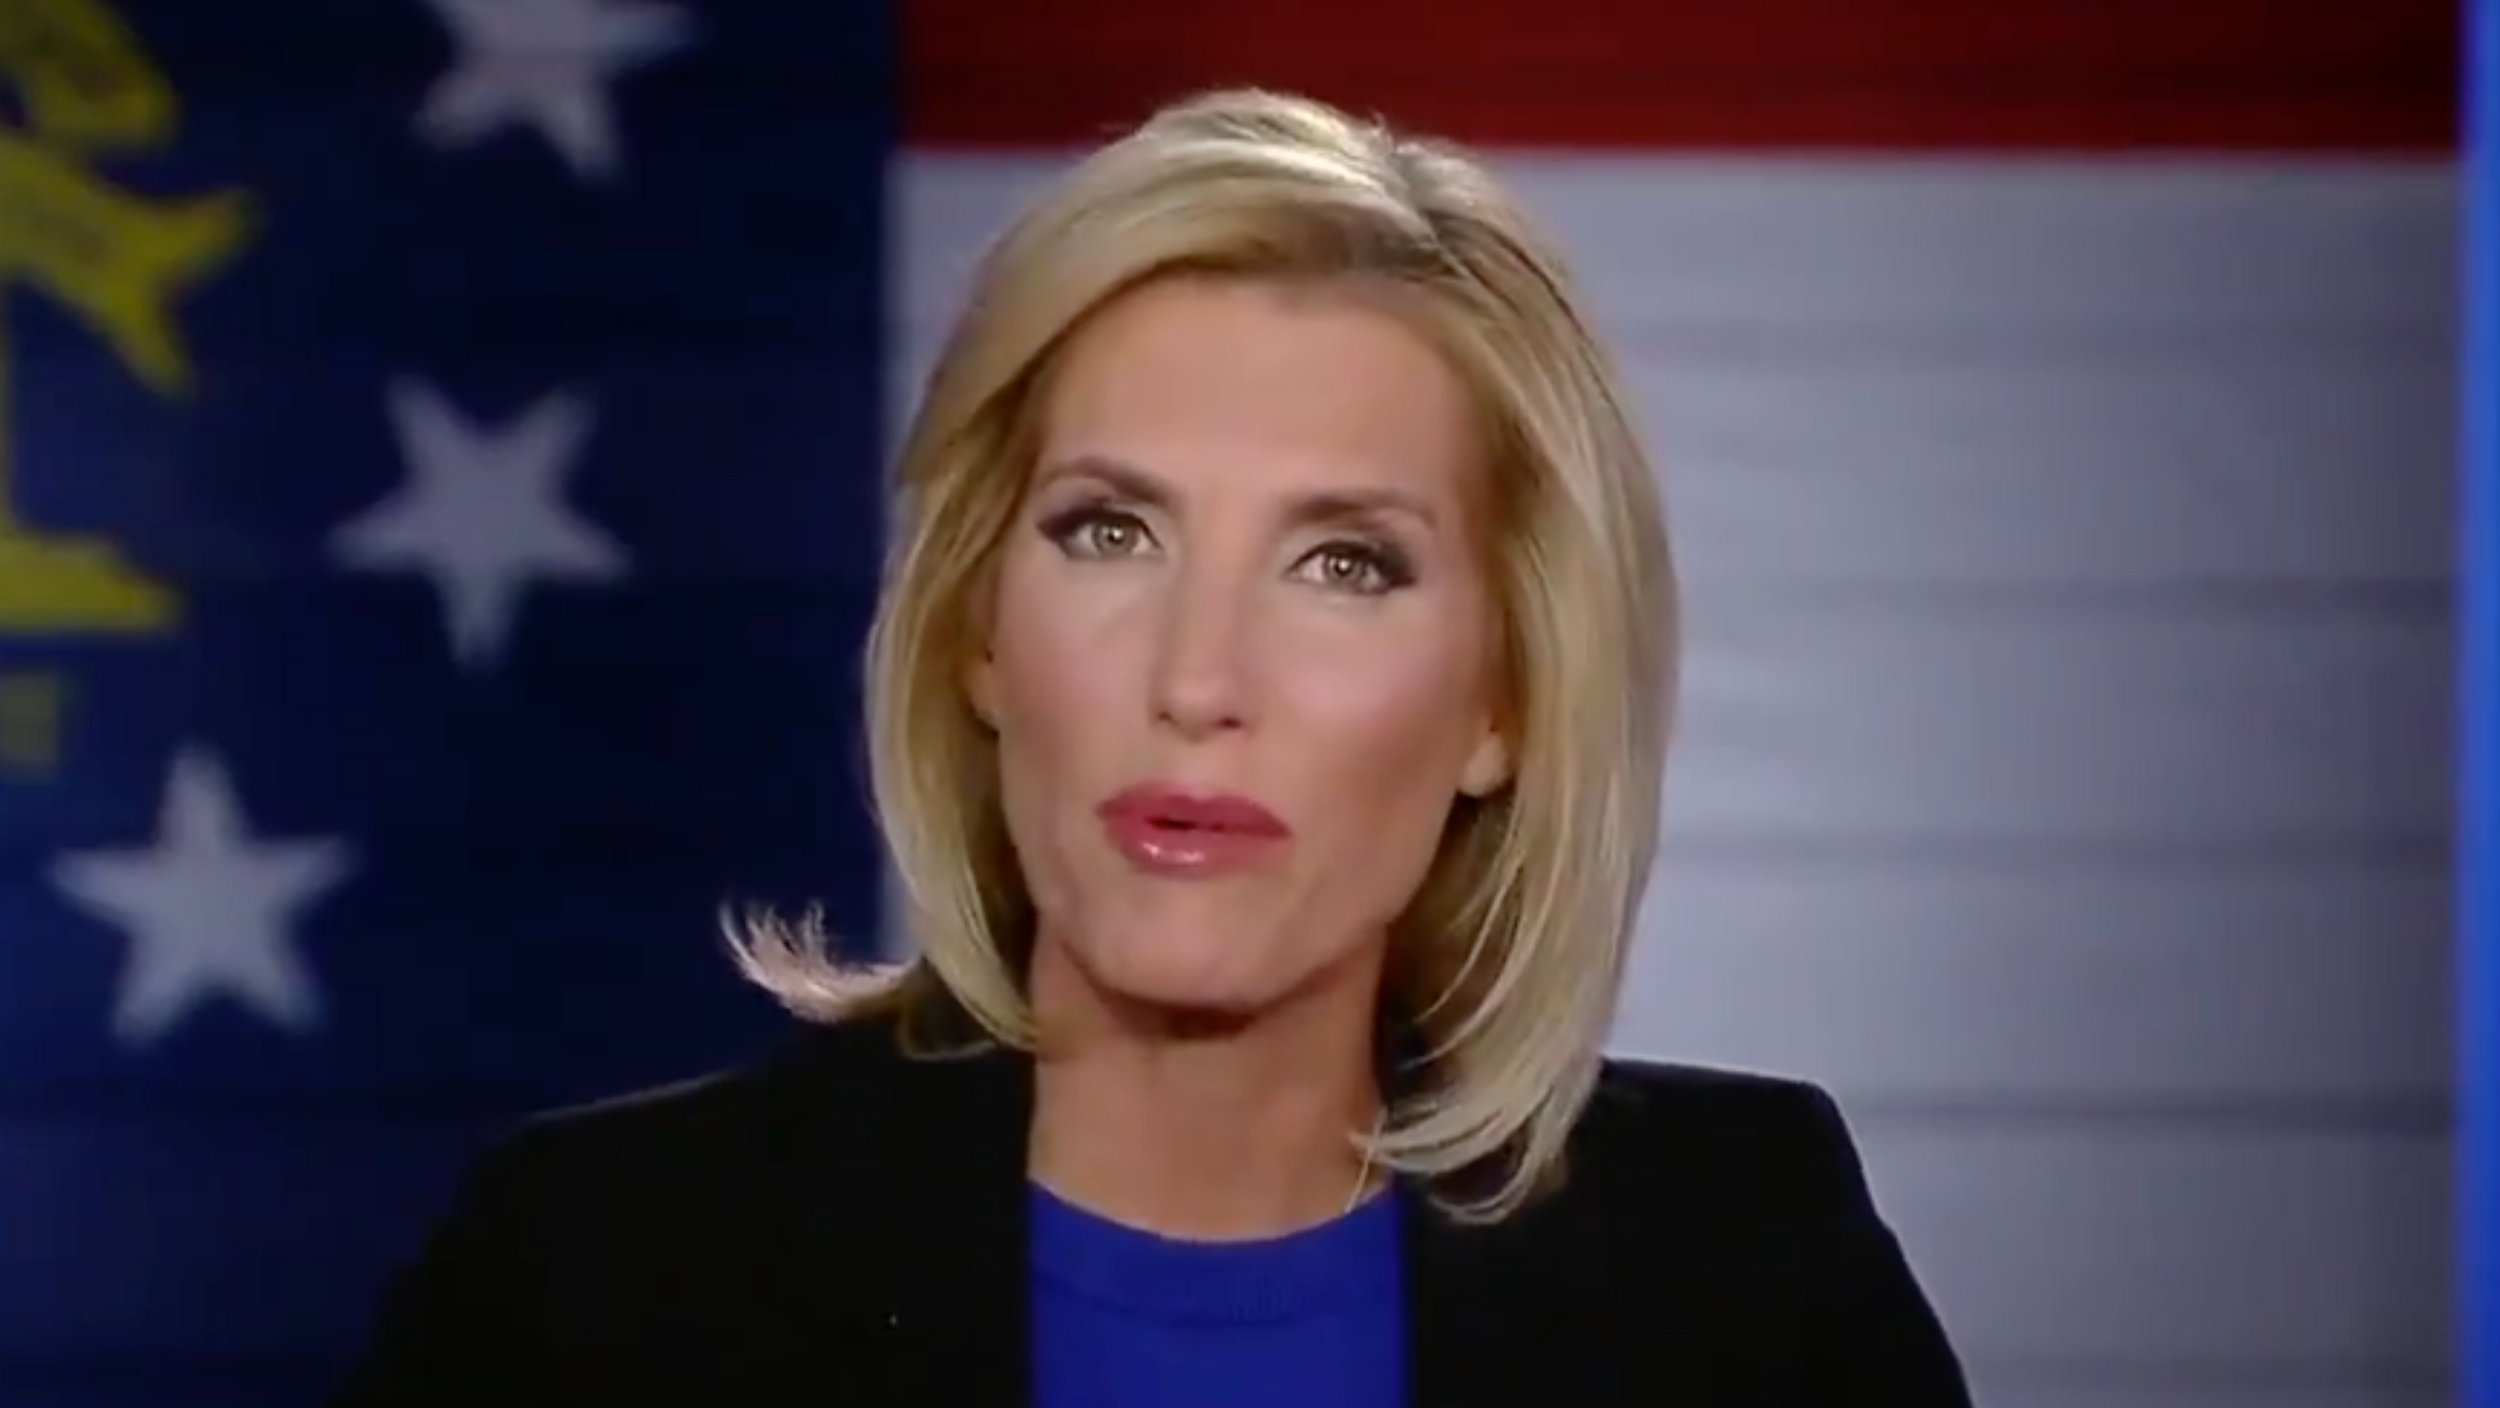 Laura Ingraham Slams Pro-Trump Election Lawyers as 'Stupid', Says They 'Don't Deserve to Win'